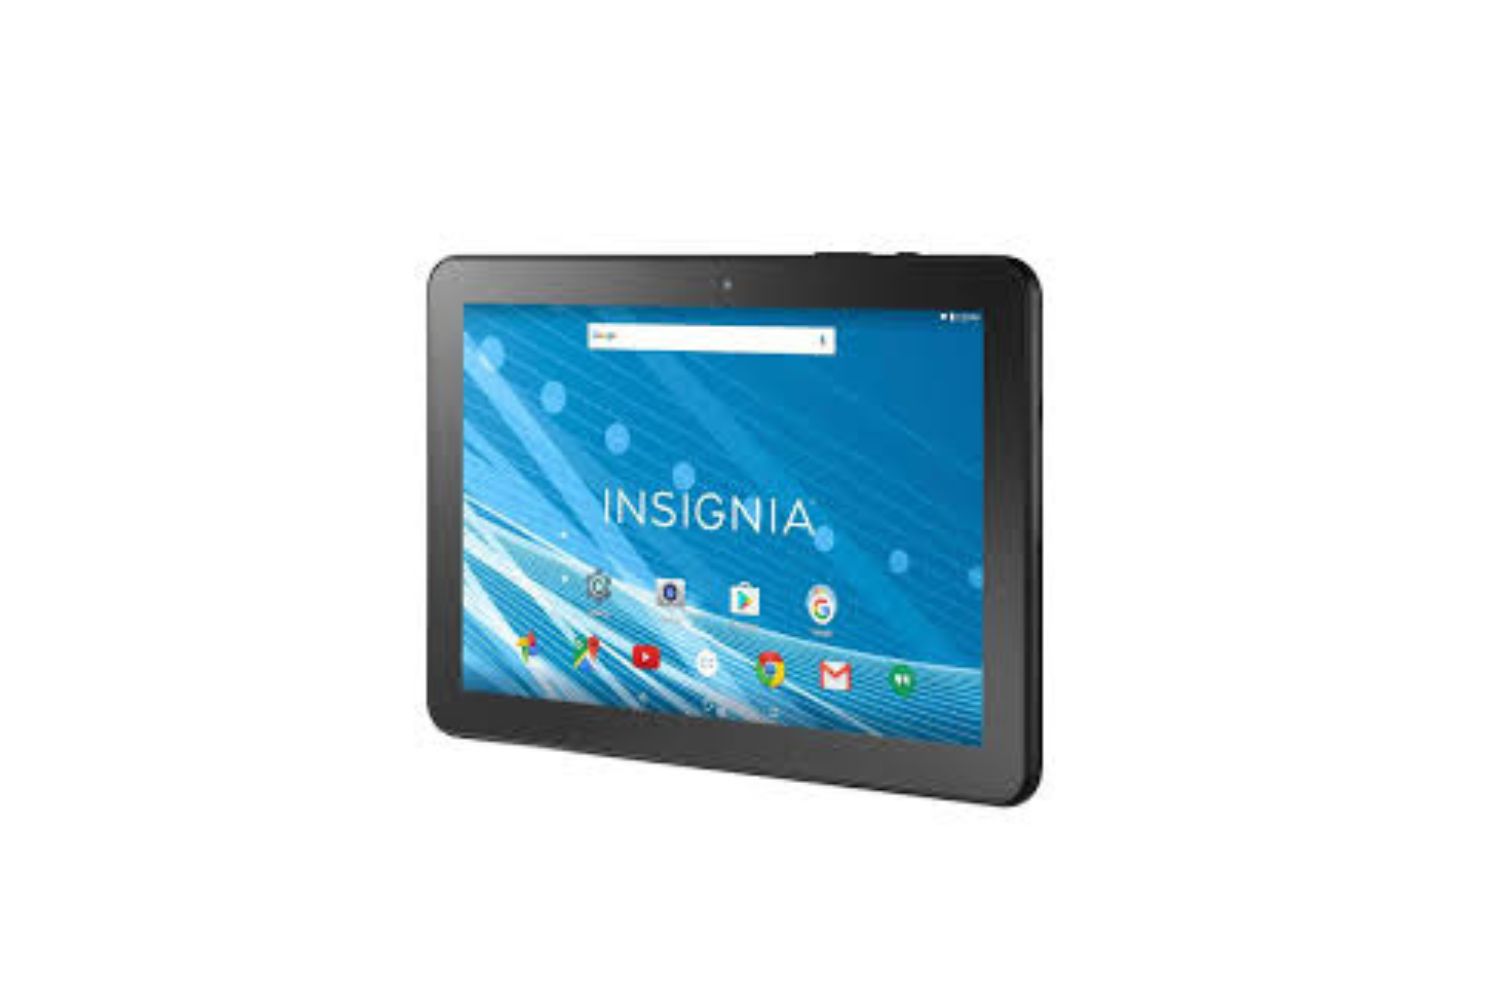 How To Update Insignia Flex Tablet